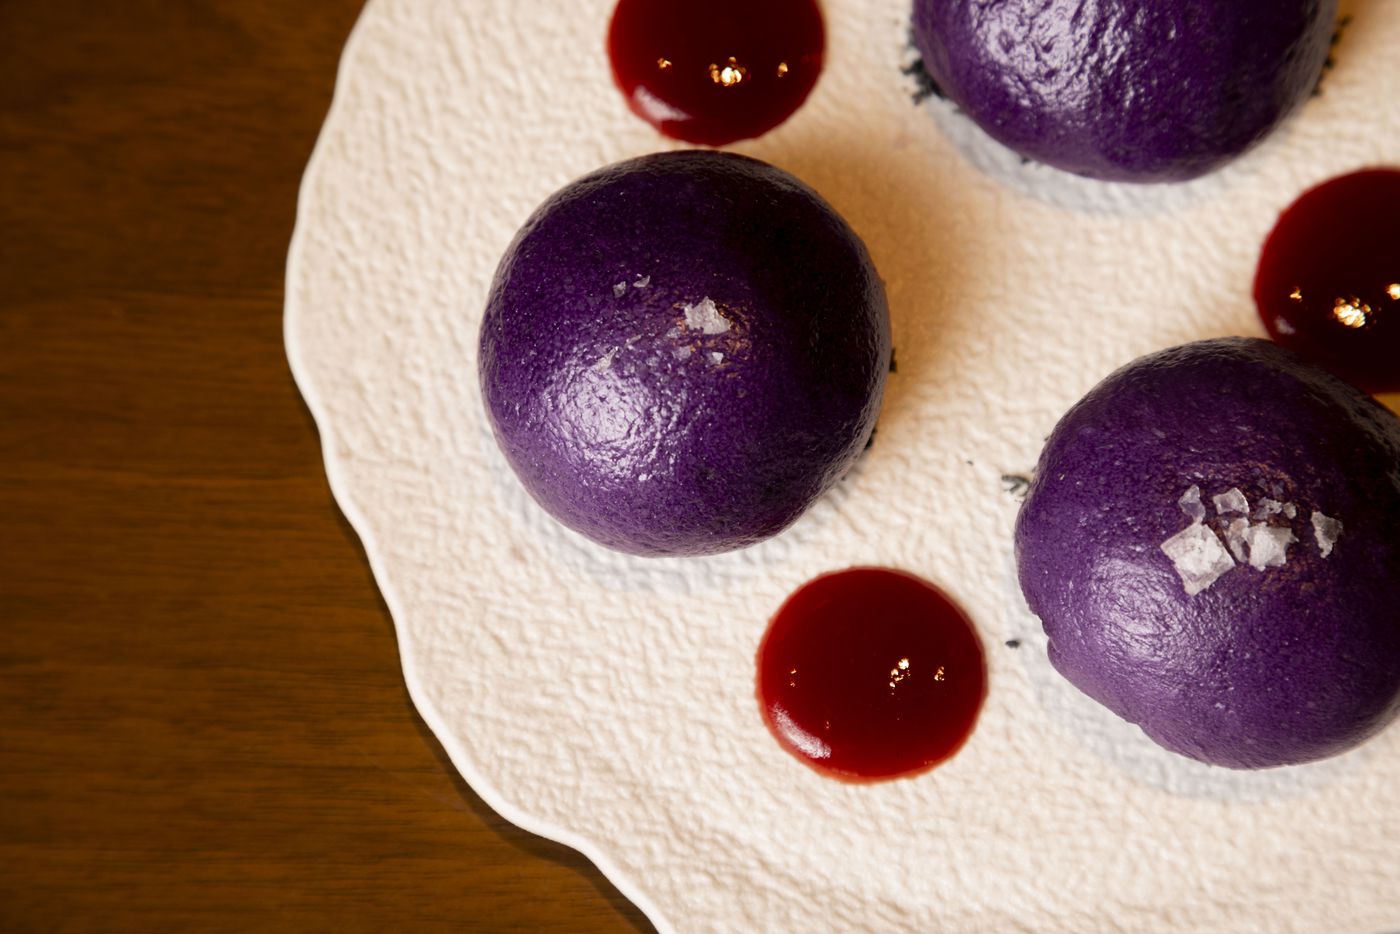 The dessert Ube Nutella Bao is prepared with coconut charcoal, strawberry sauce, sea salt at...